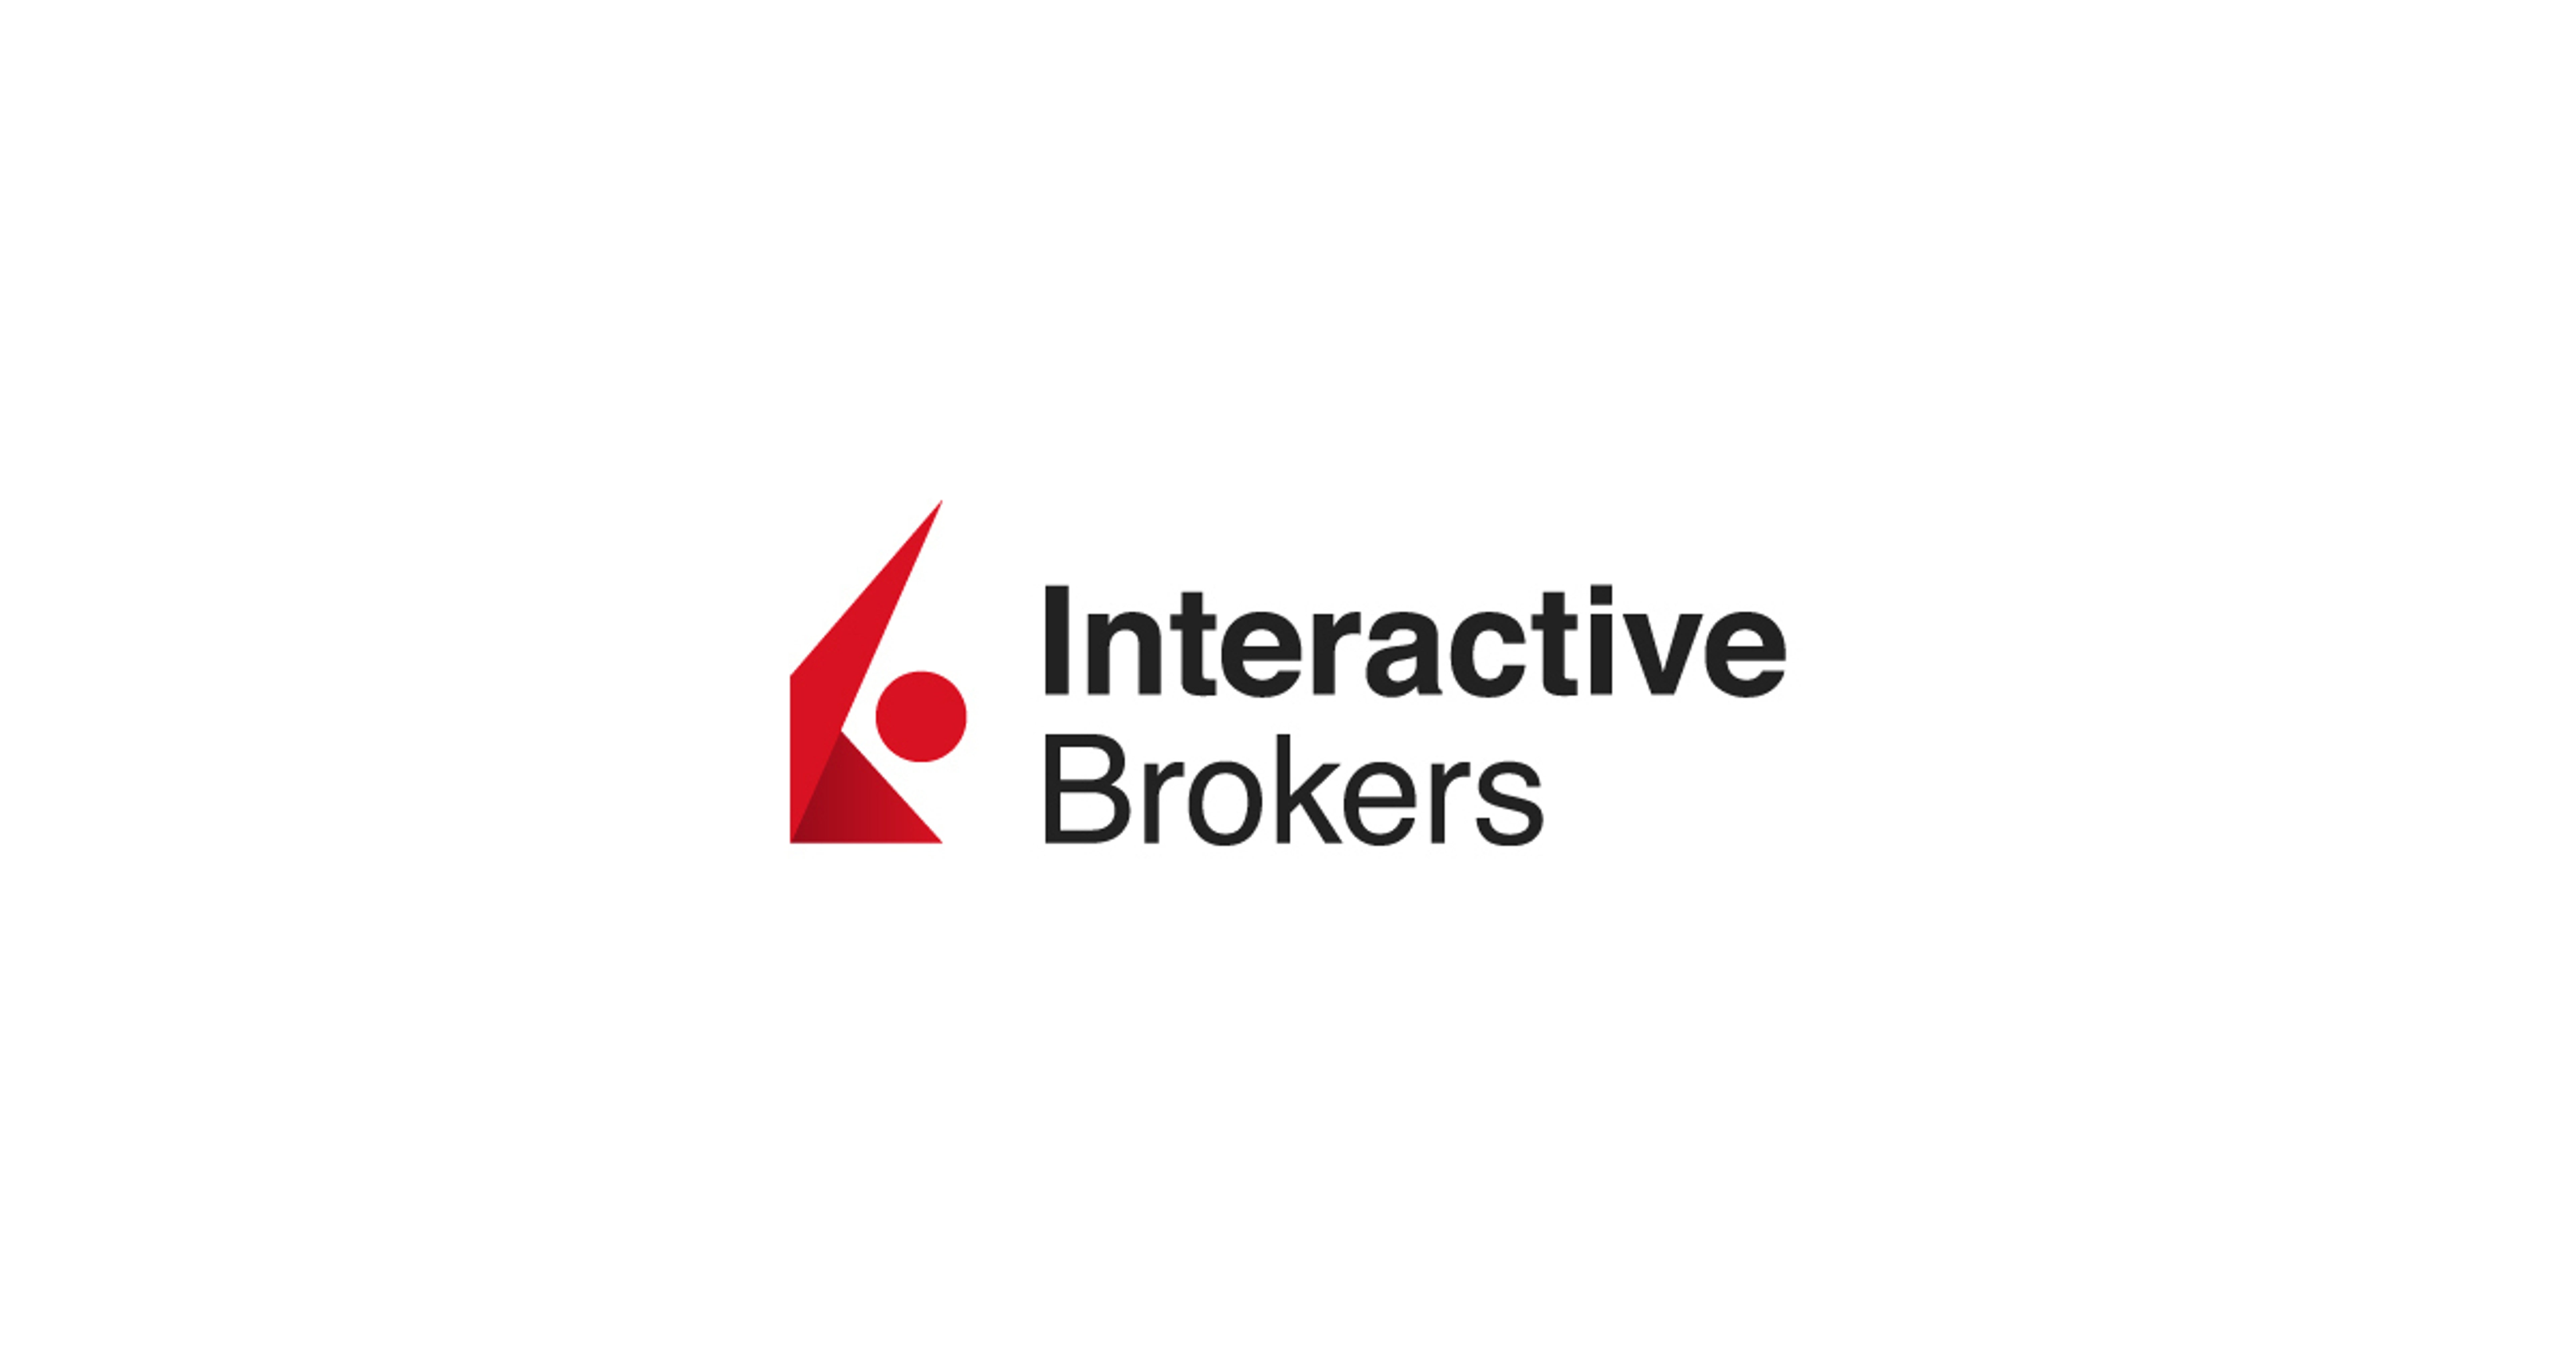 Want Better Execution On Options Trades? Interactive Brokers Has You Covered With One New Feature